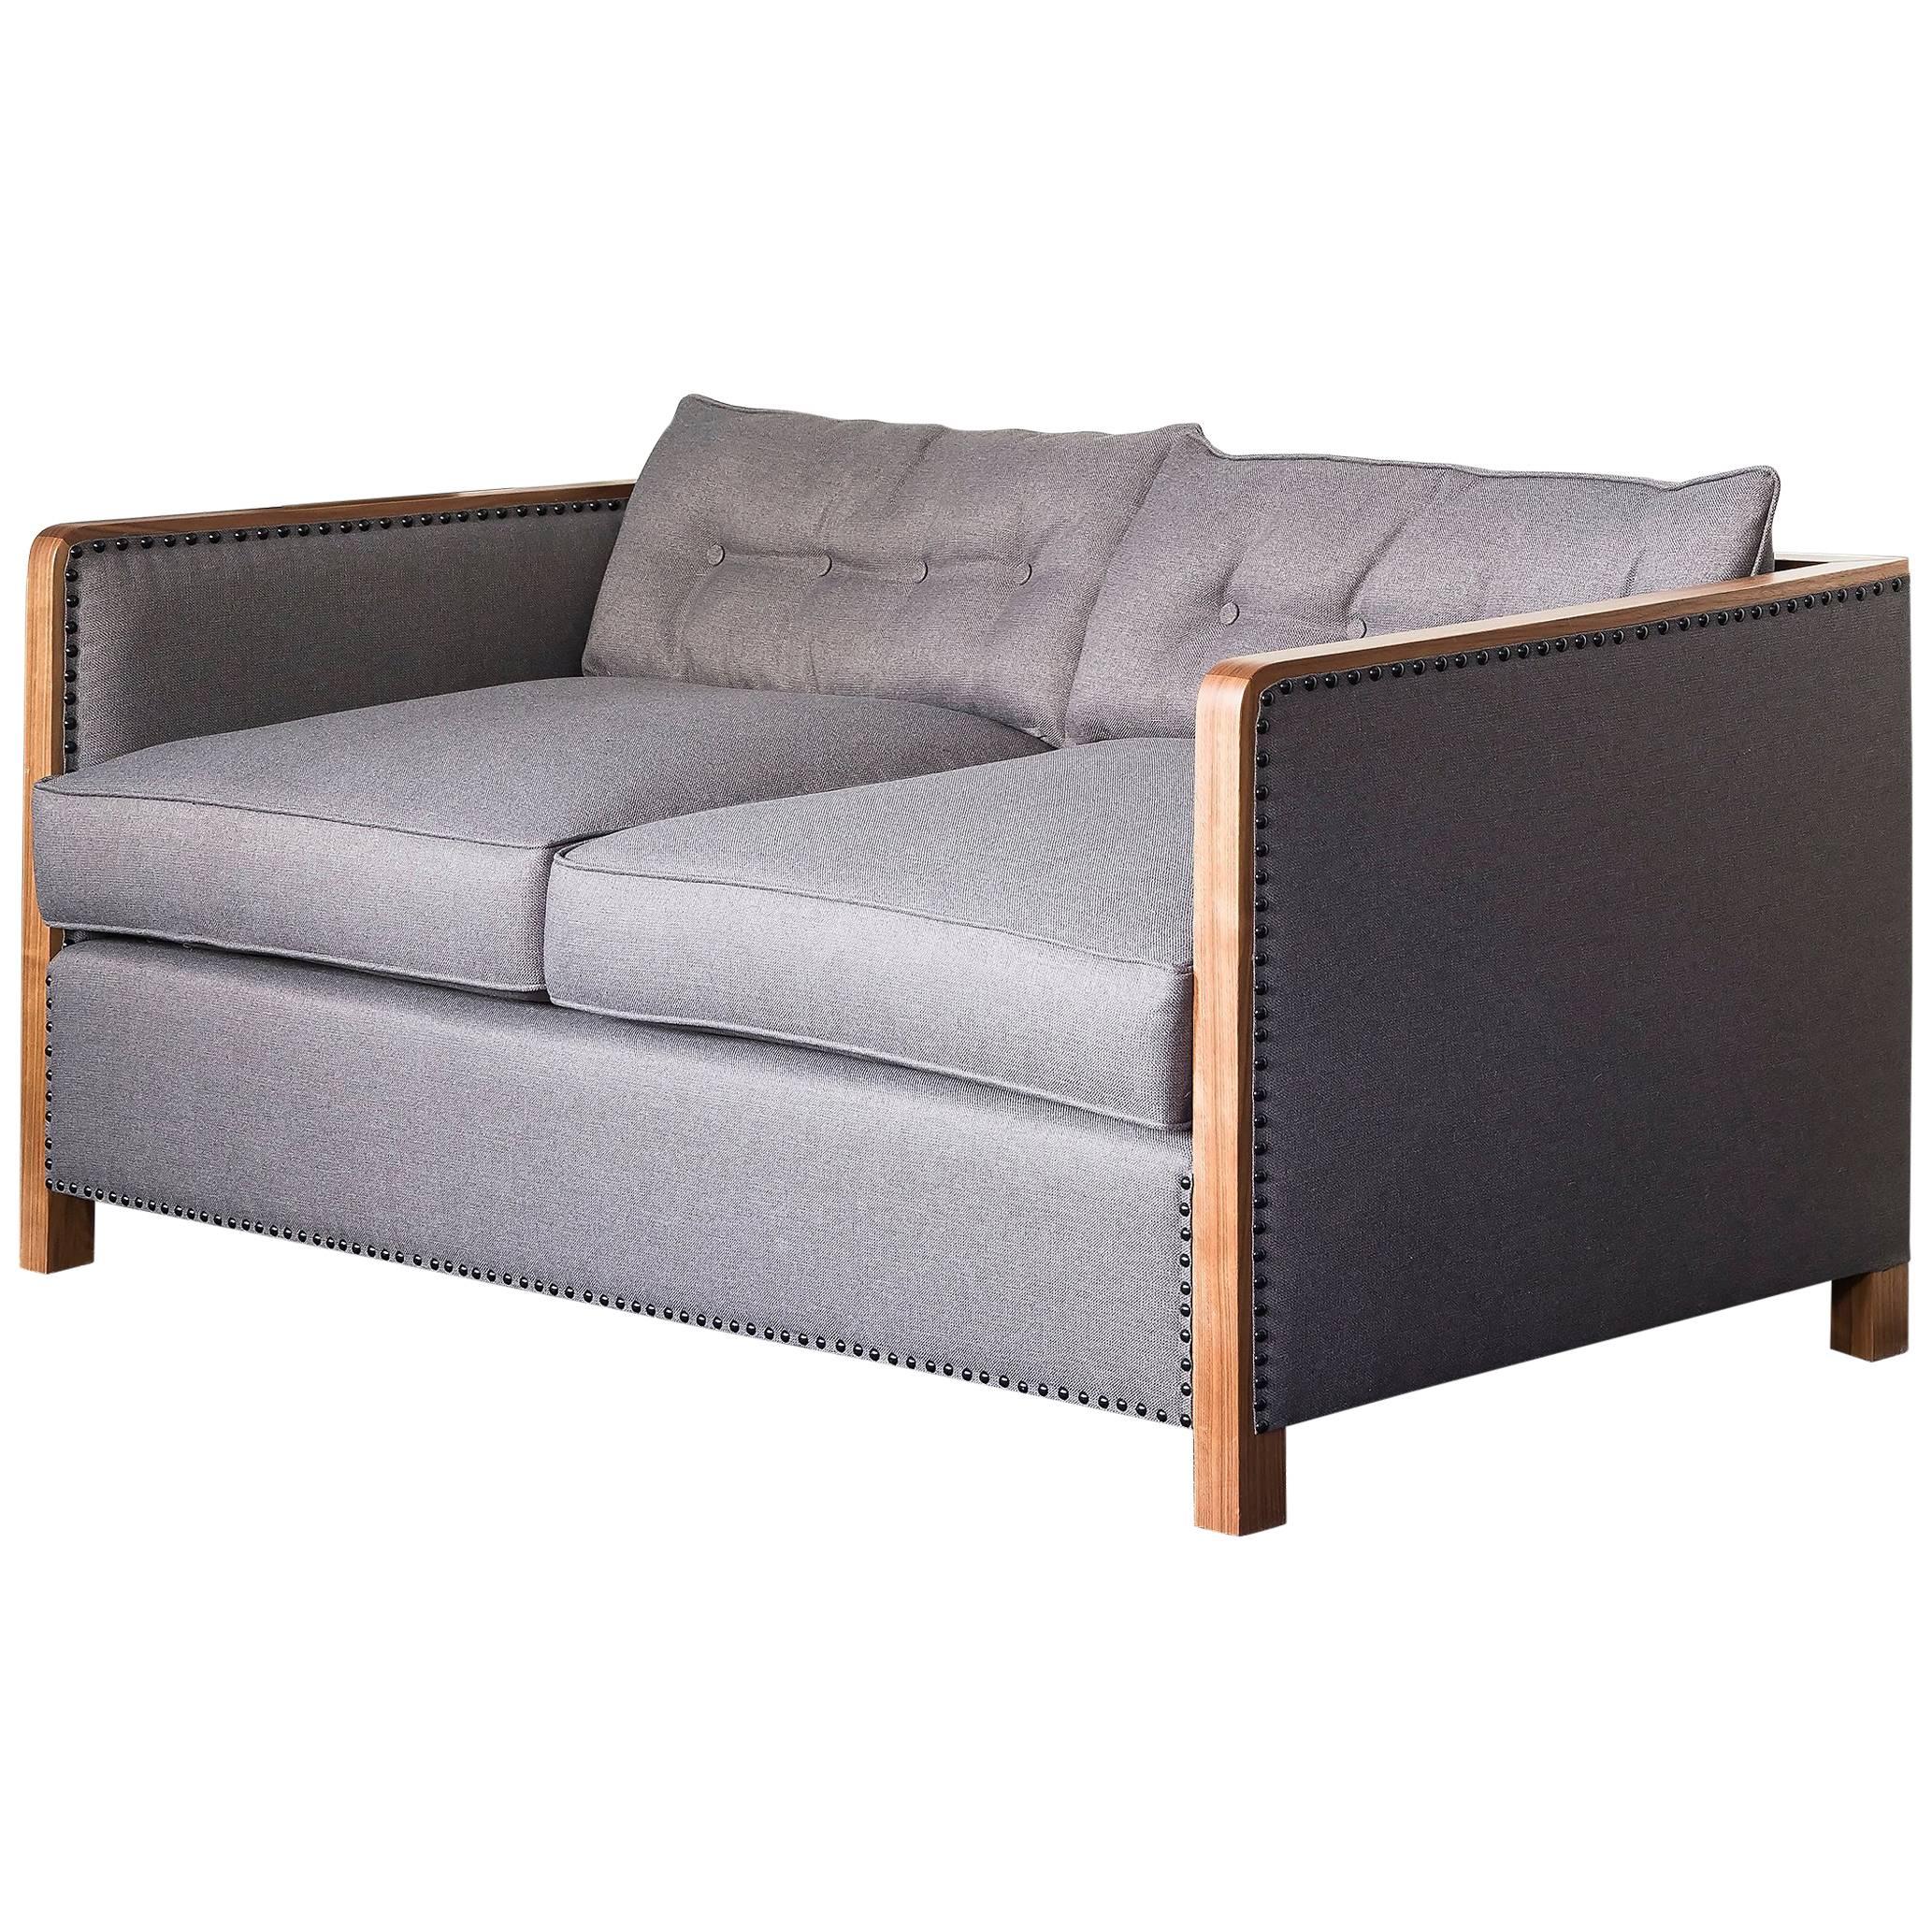 Art Deco Style Bacco Two-Seat Sofa in Natural Walnut, Linen and Gunmetal Studs For Sale